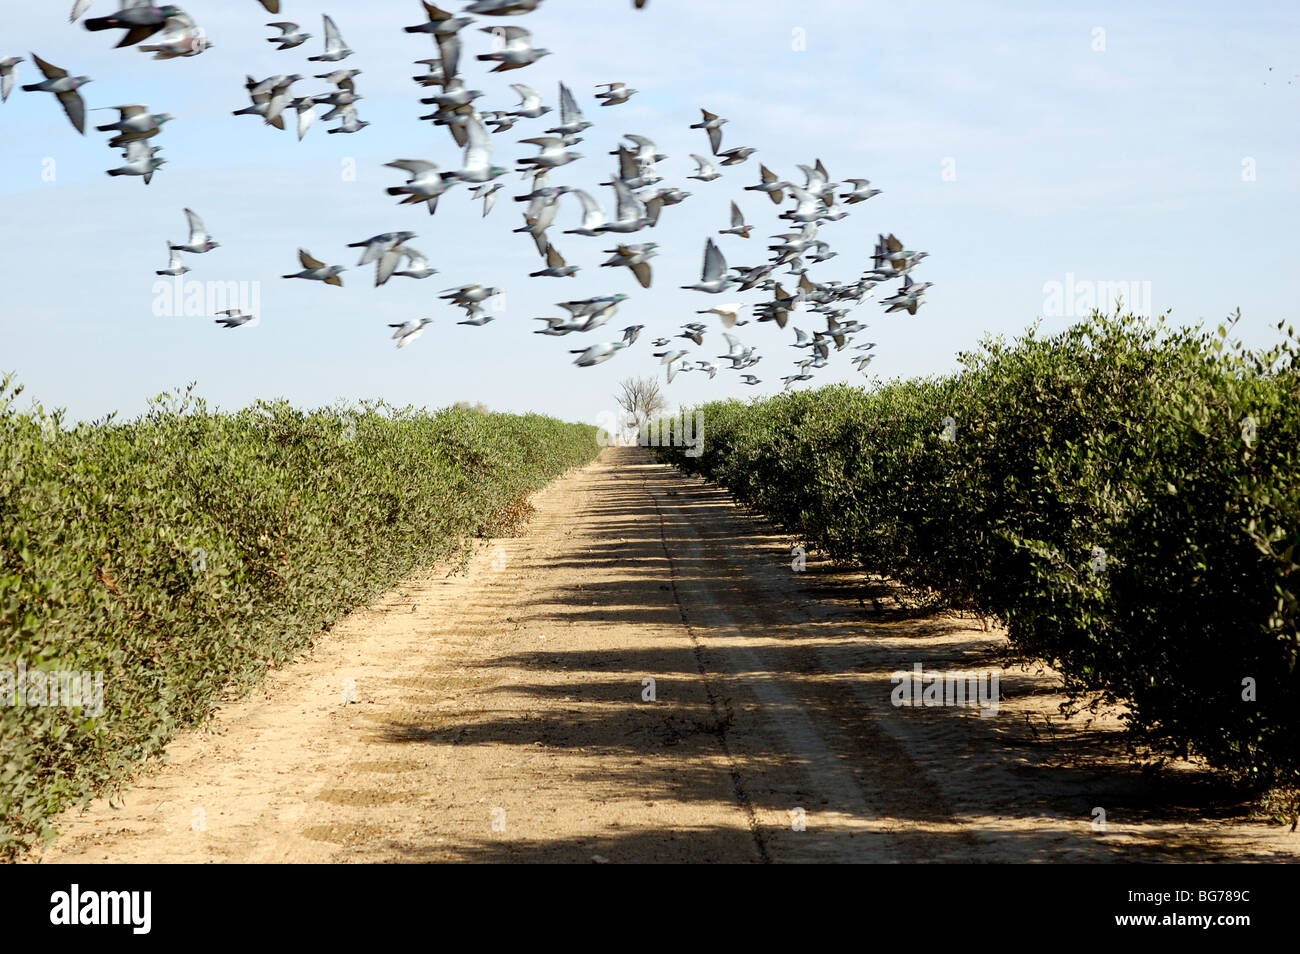 Israel, Negev, a flock of birds fly over a cultivated field. Birds are a major pest to farmers Stock Photo